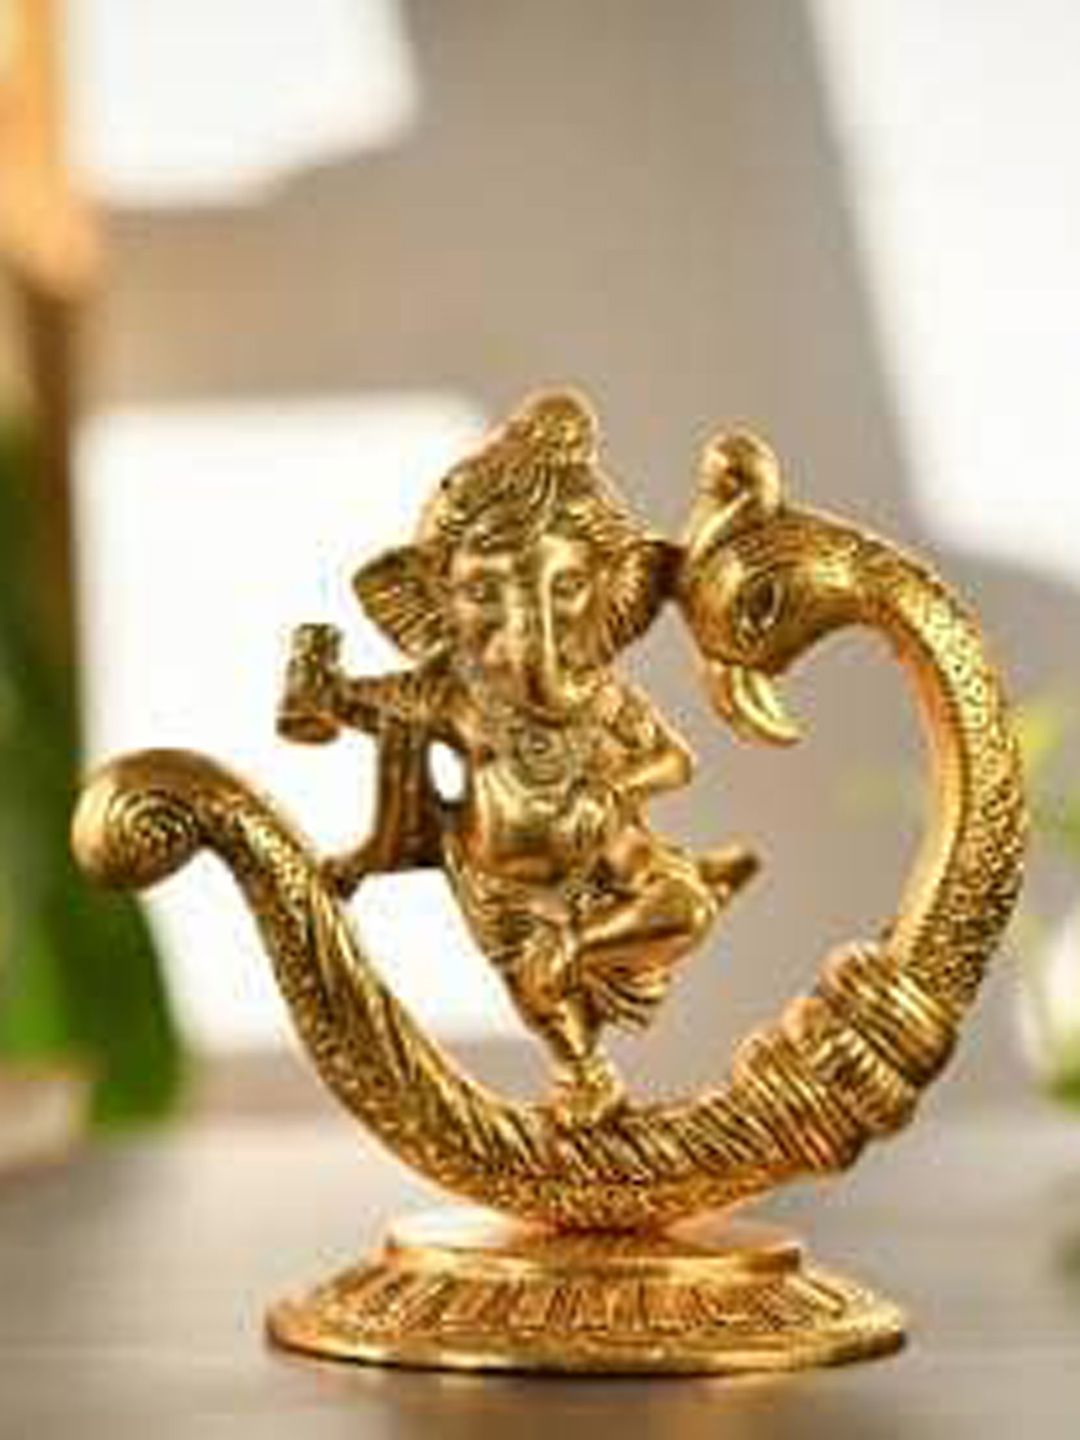 Fashion Bizz Gold-Toned Textured Ganesha Idol Showpiece for Home Pooja Entrance Decor Price in India